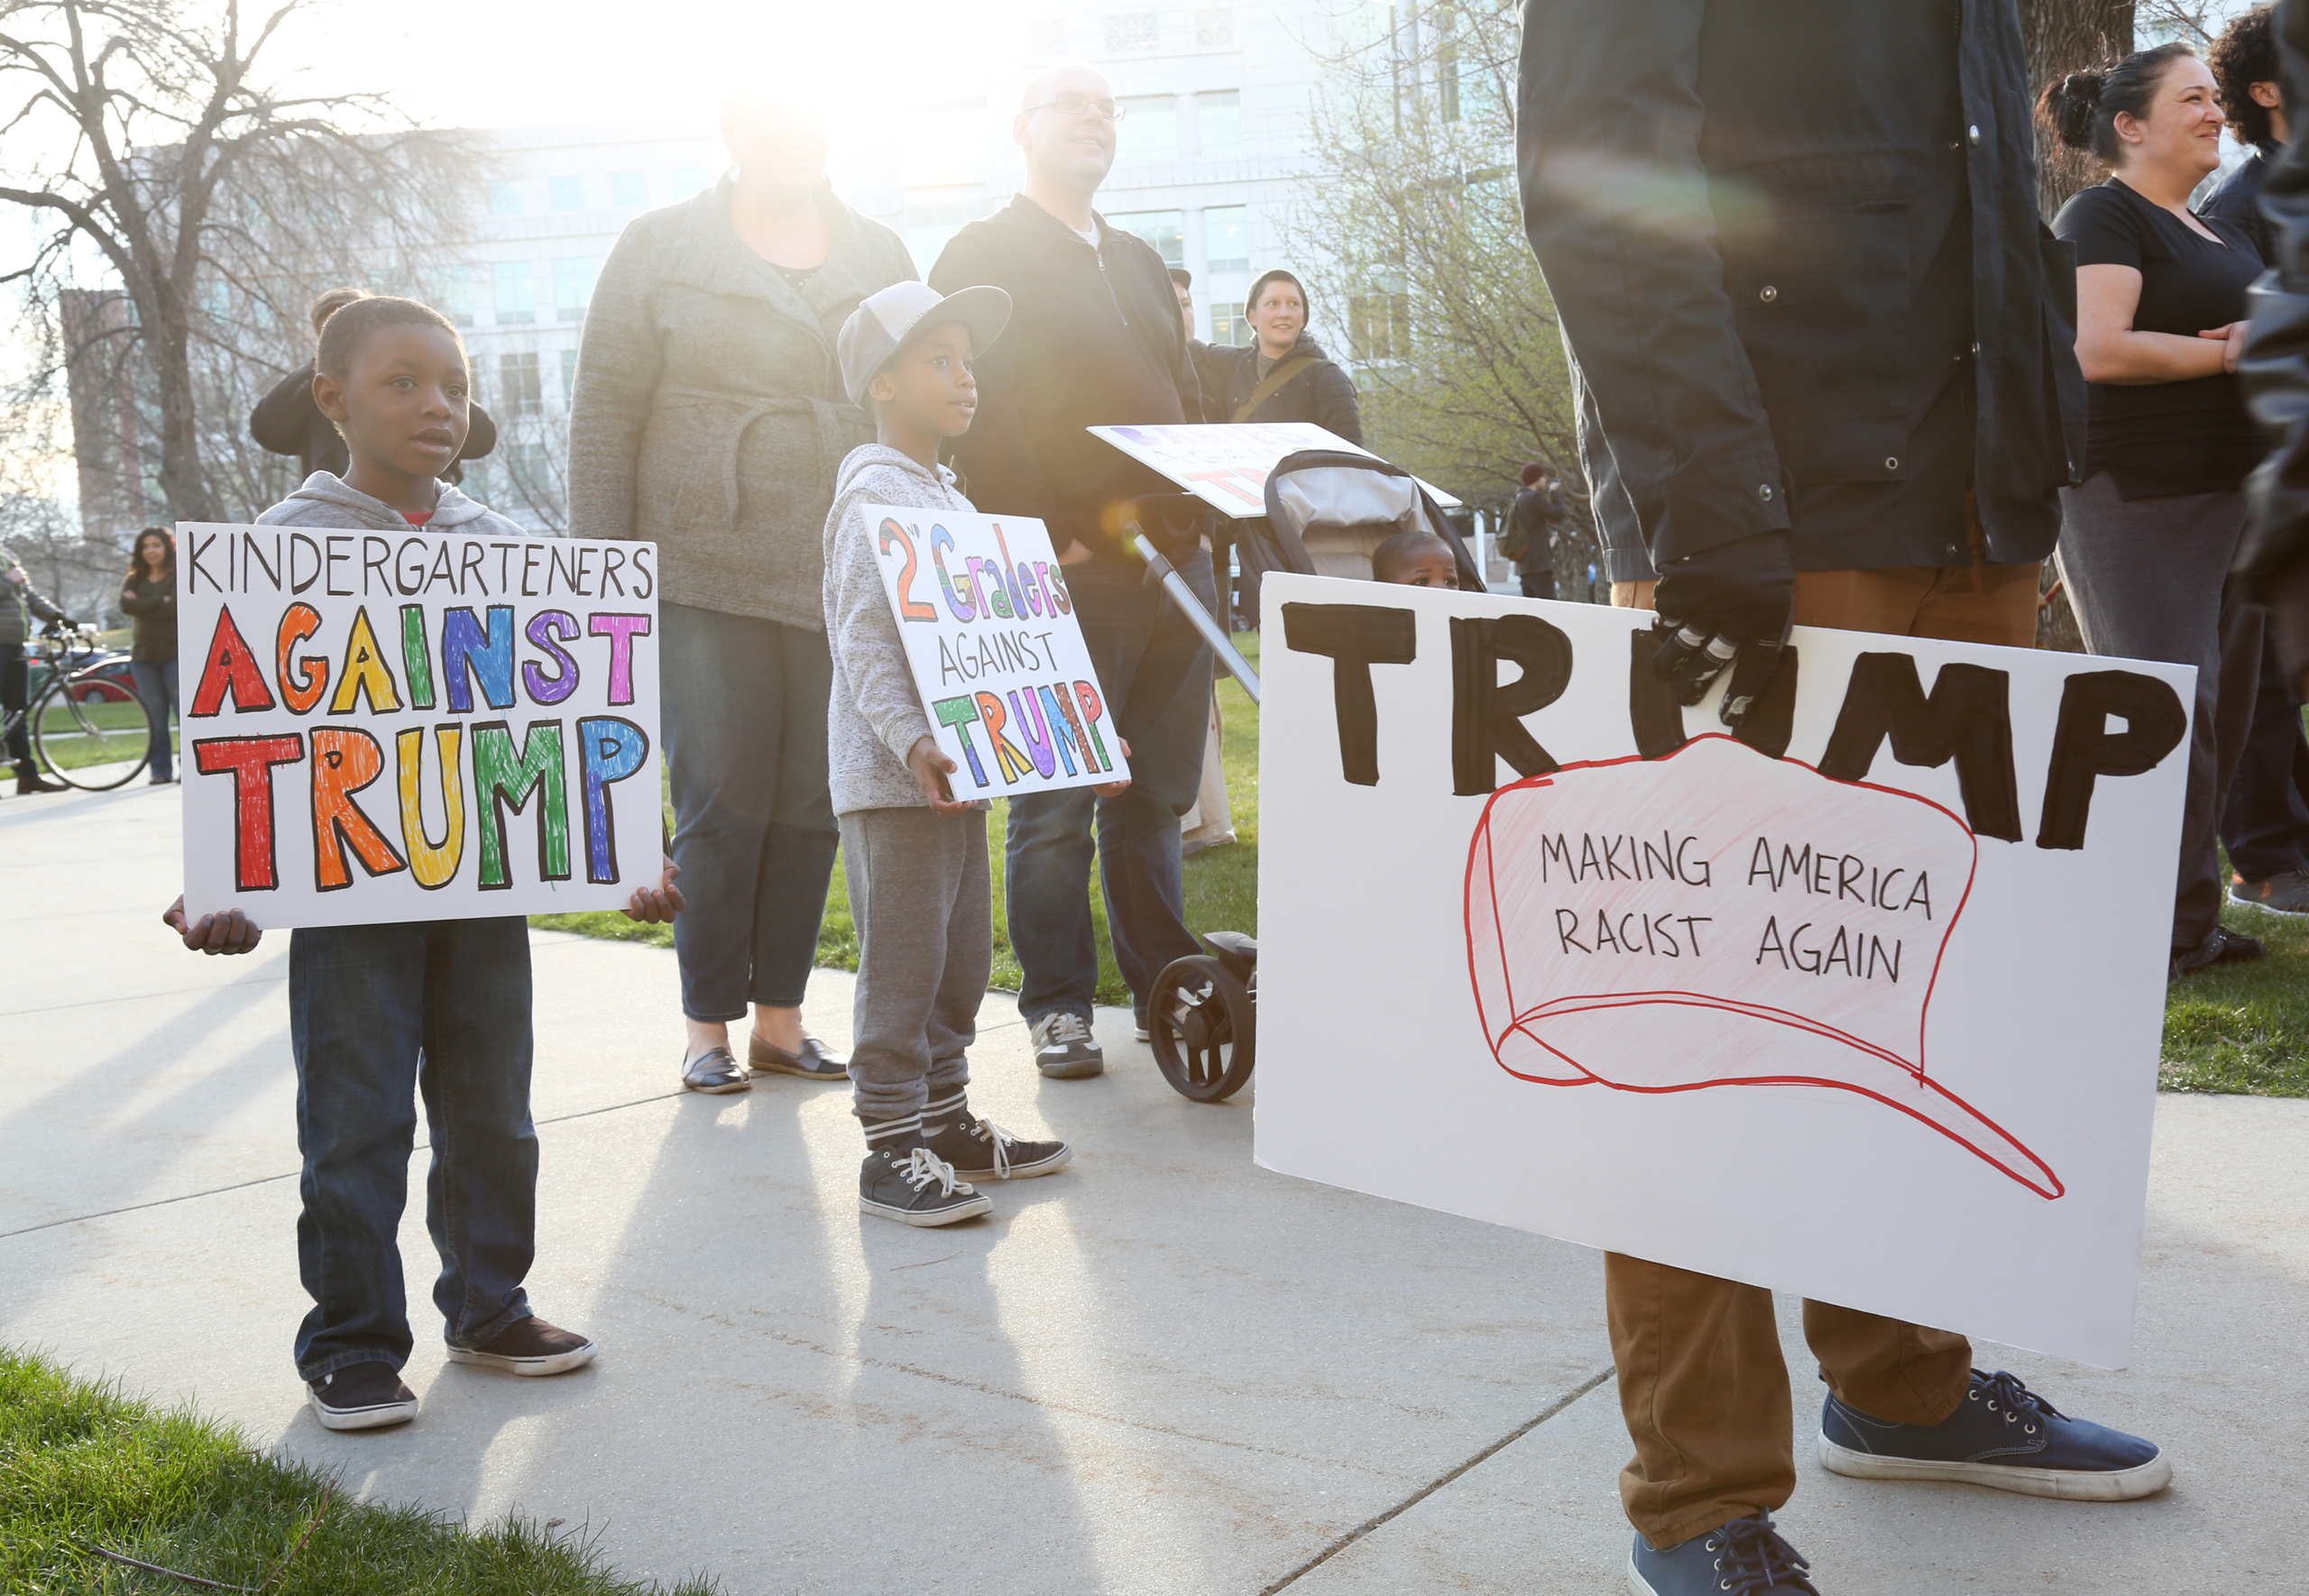 Brothers Noah, left and Owen Burket hold signs as they protest with their family at a rally outside the Infinity Events Center in Salt Lake City, where Republican Presidential candidate Donald Trump held a campaign rally on March 18, 2016. (Benjamin Zack—AP)